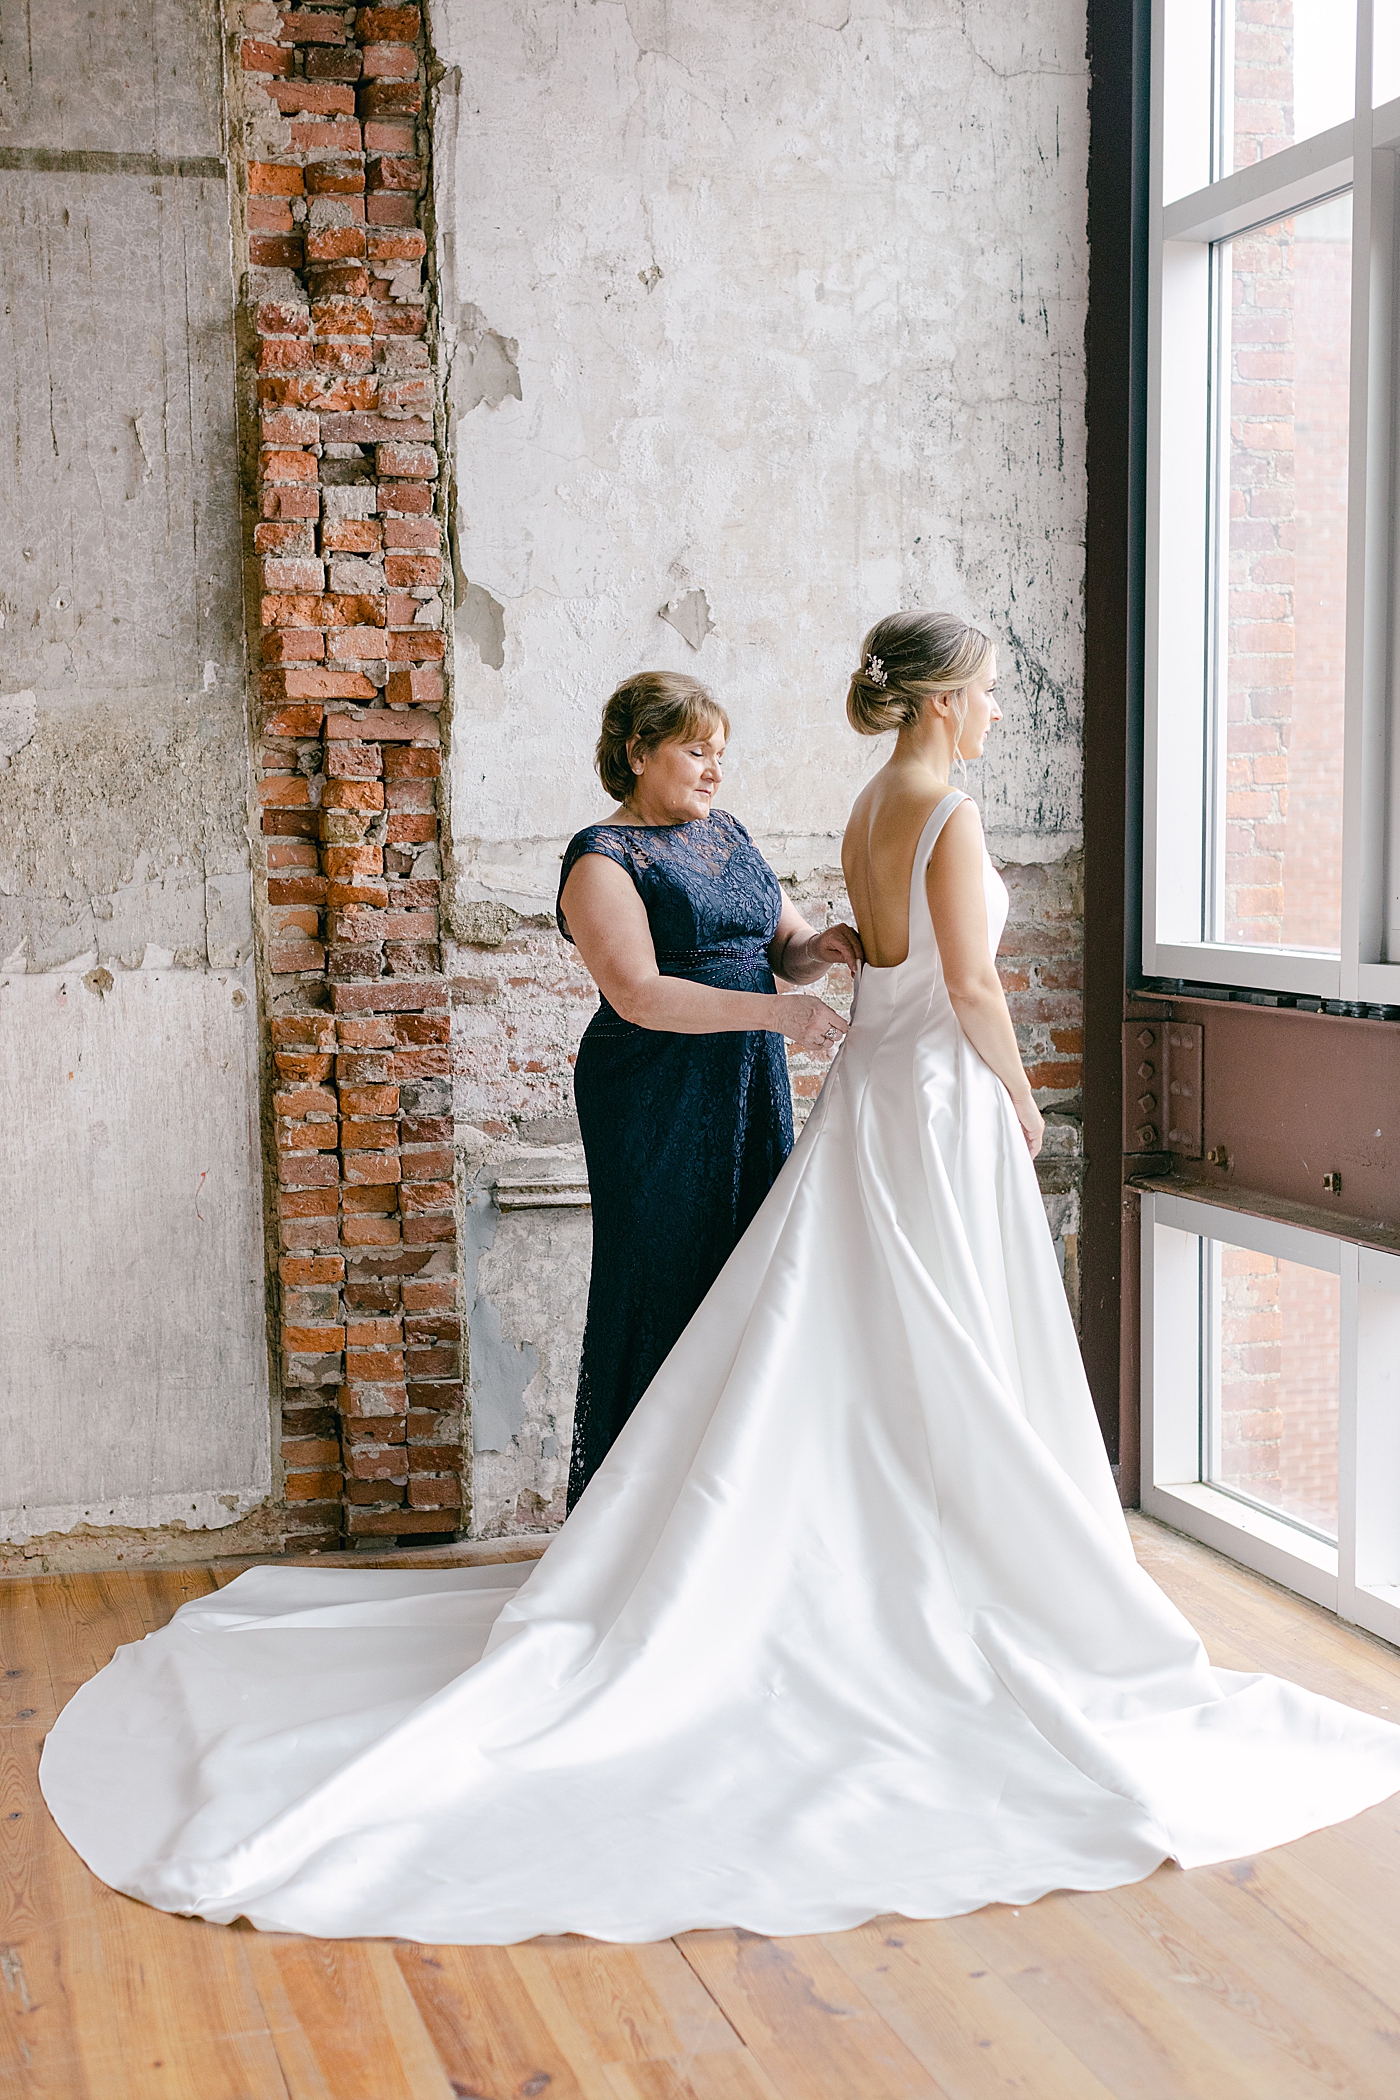 Mother of the bride helping the bride zip her dress | Photo by Hope Helmuth Photography